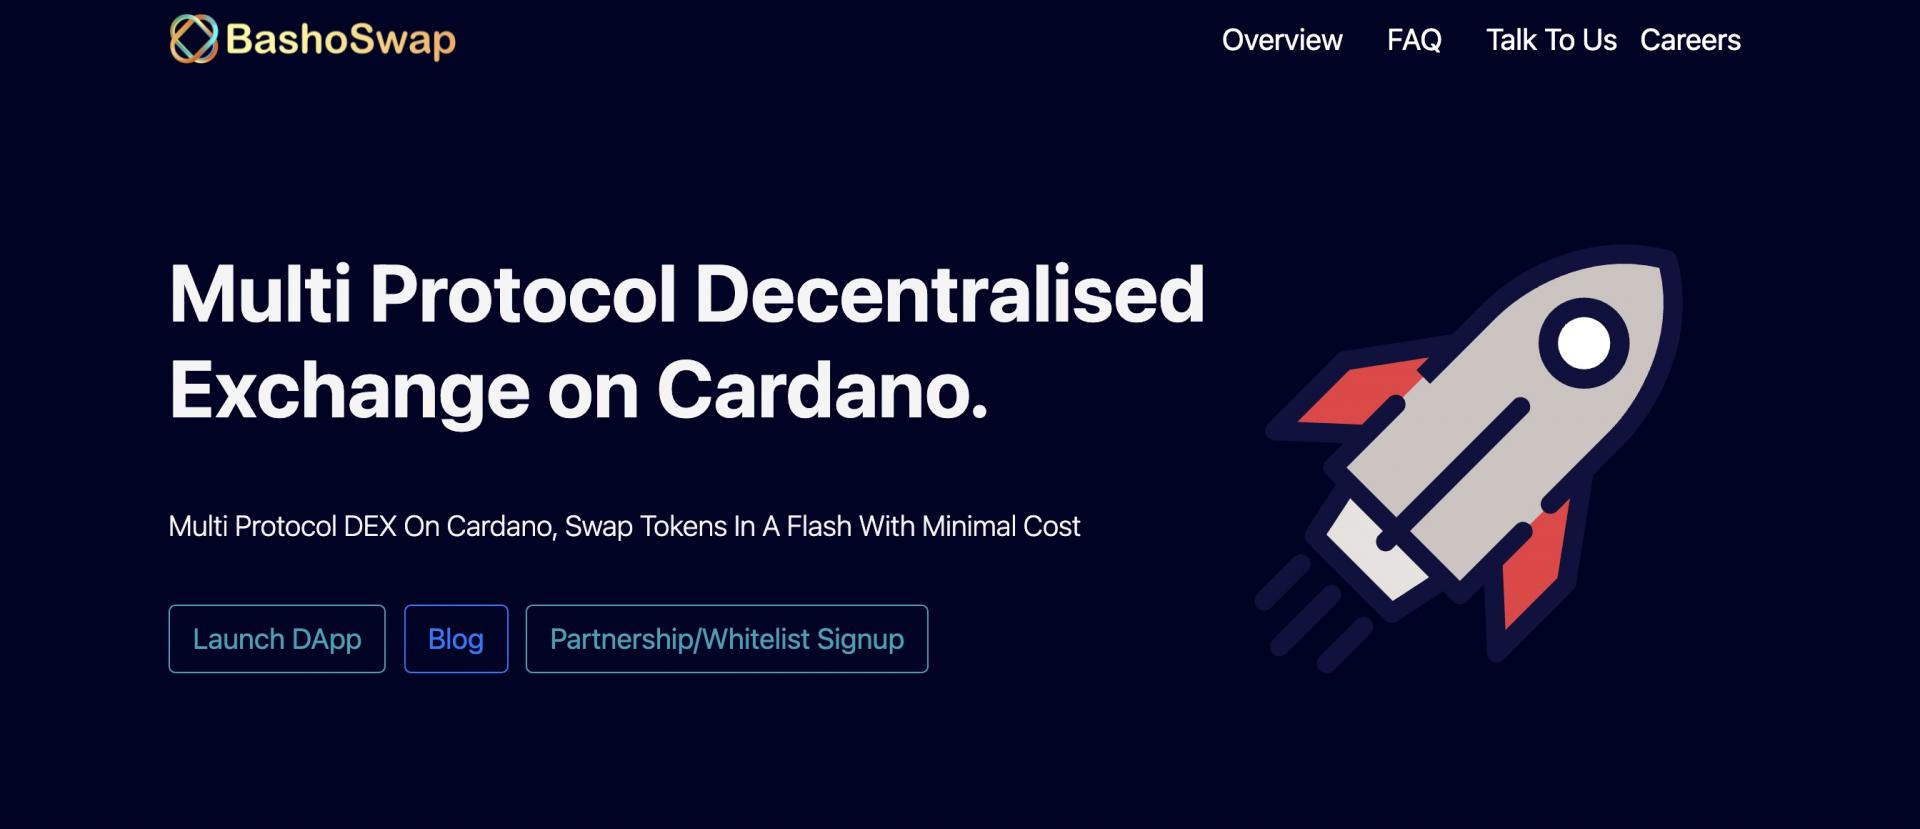 Bashoswap Building a Cardano-Powered Decentralized Exchange